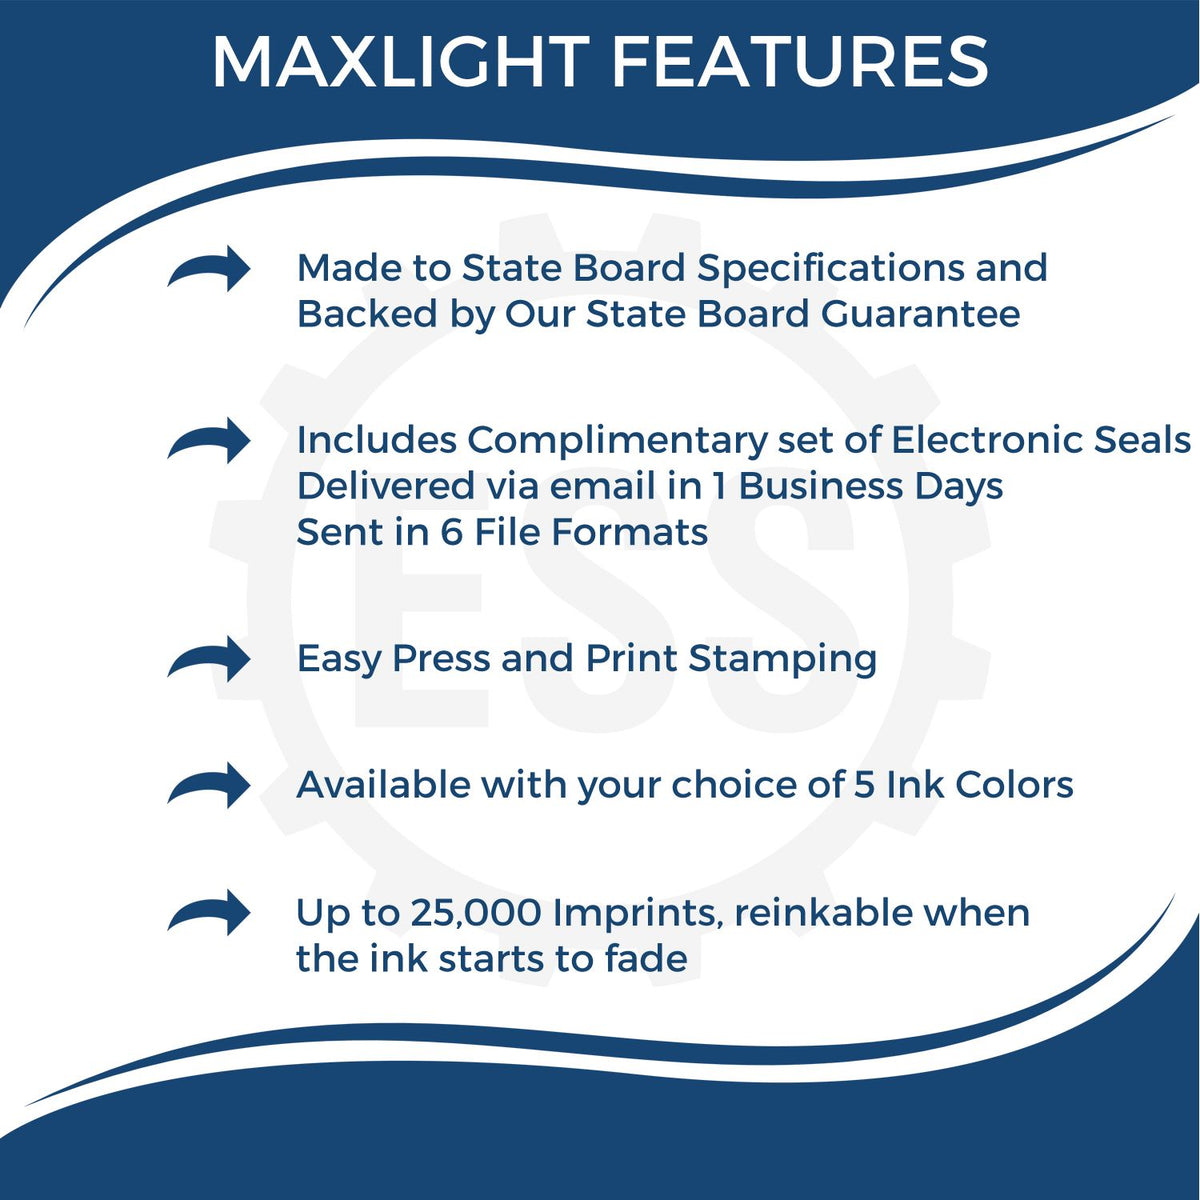 A picture of an infographic highlighting the selling points for the MaxLight Premium Pre-Inked Nevada State Seal Notarial Stamp